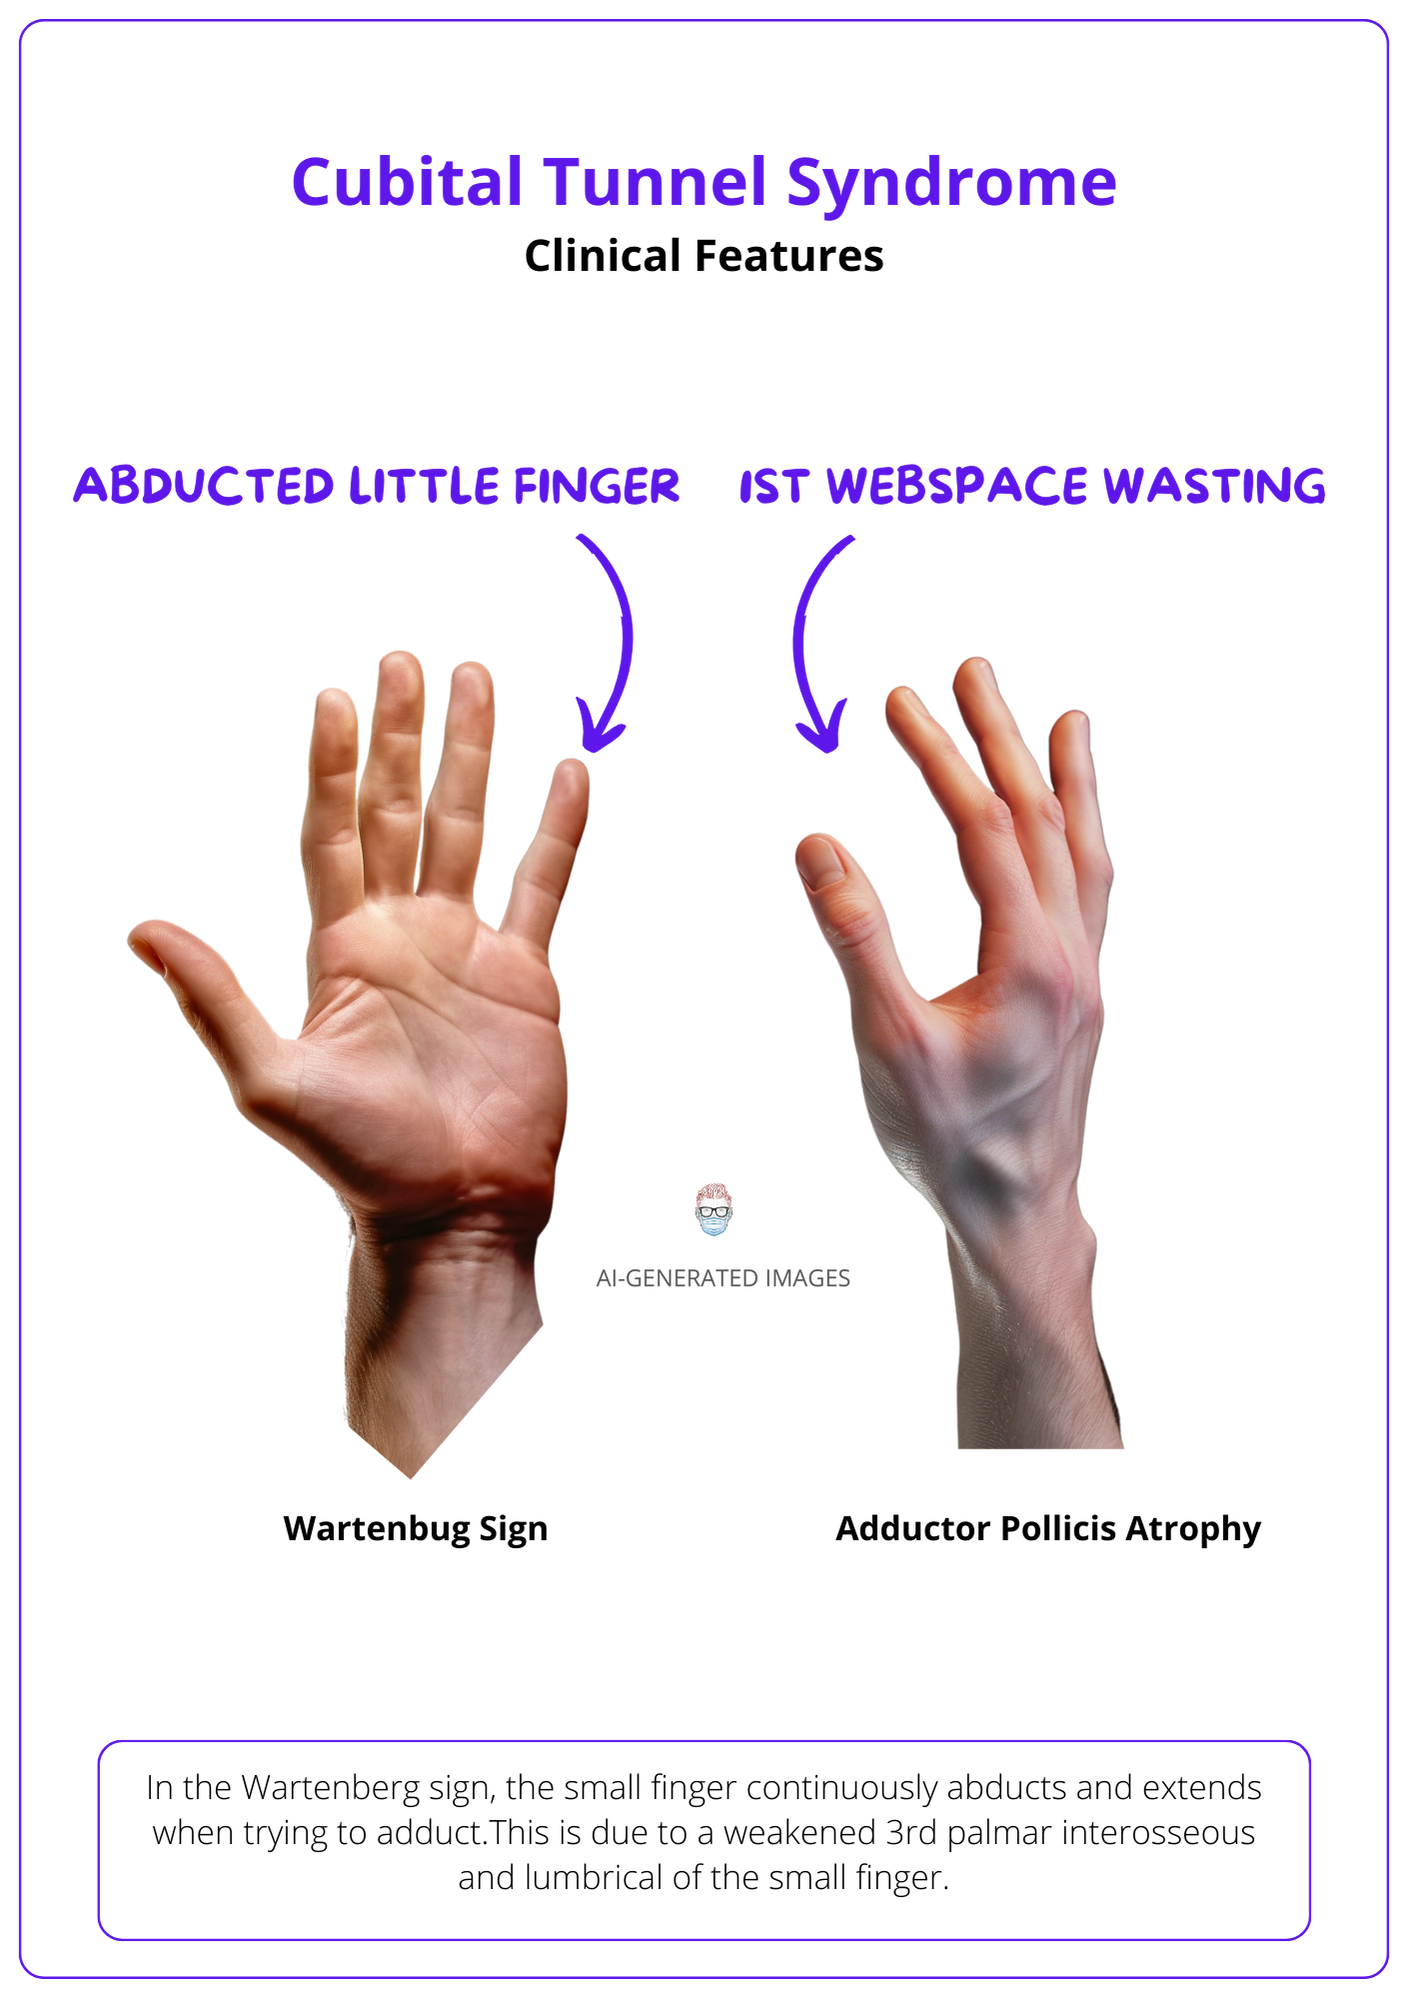 This image shows the Clinical Features for cubital tunnel syndrome on Inspection